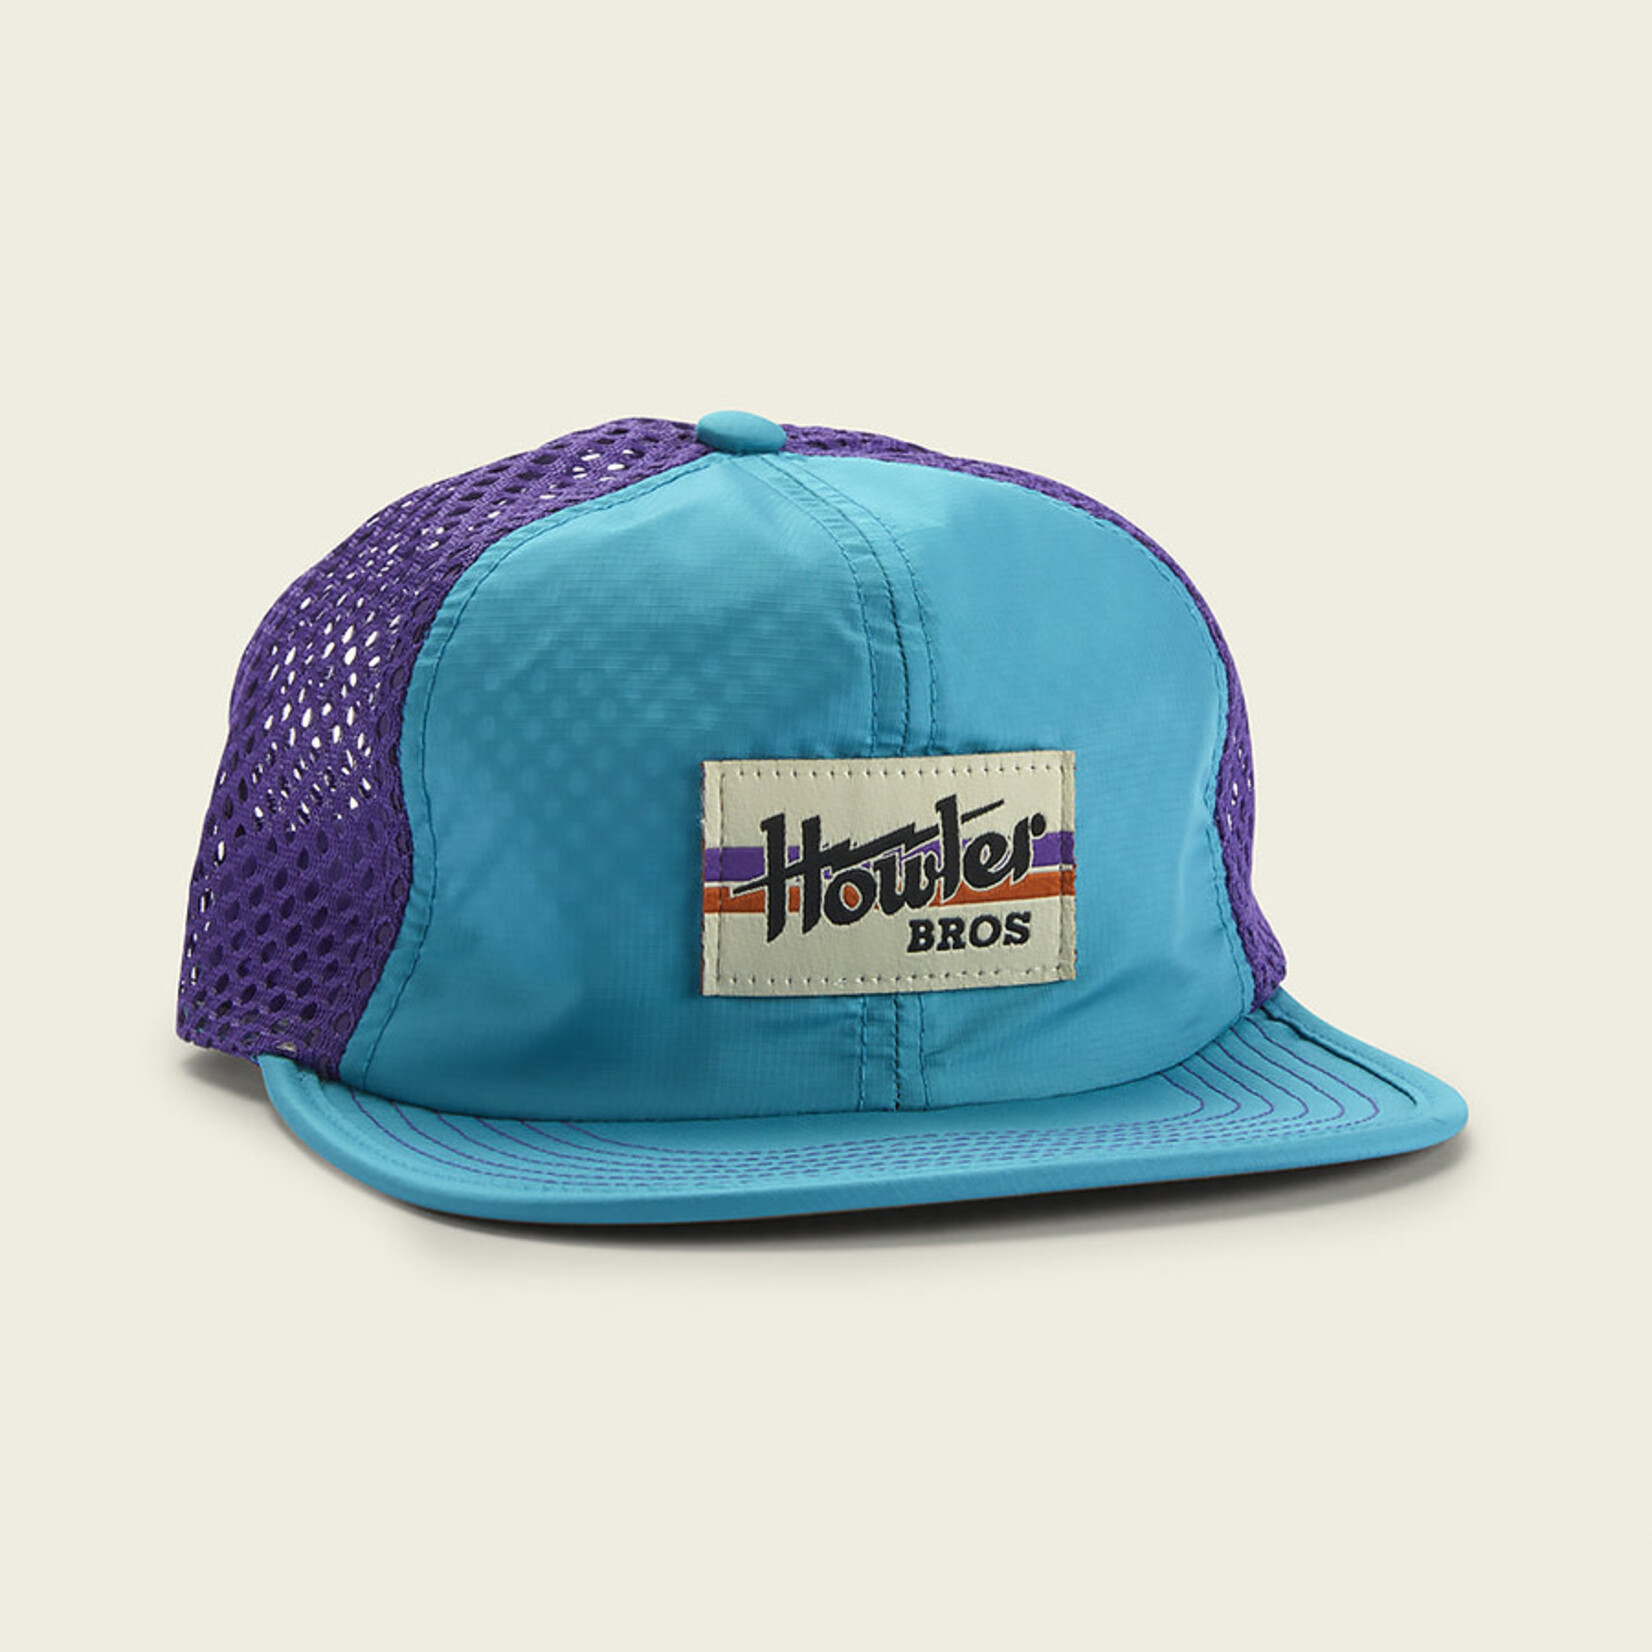 Howler Brothers Howler Electric Stripe Tech Strapback - Teal/Purple